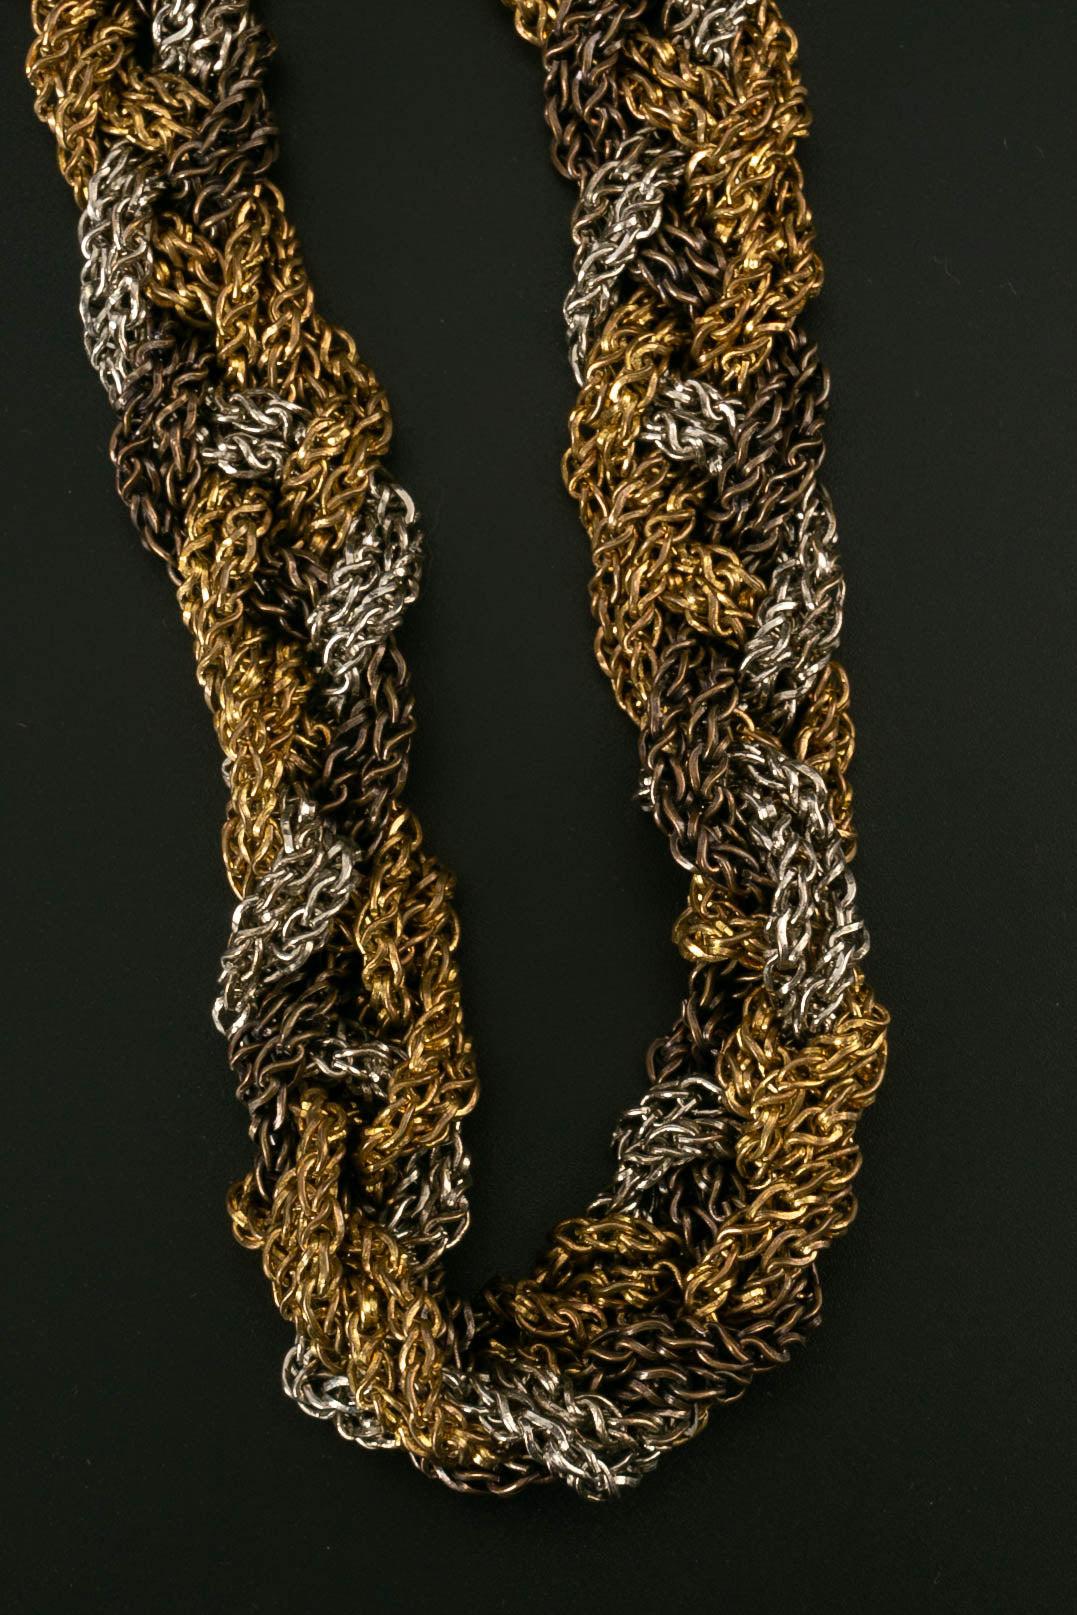 Yves Saint Laurent Intertwined Chains Belt, 1960s-1970 For Sale 4